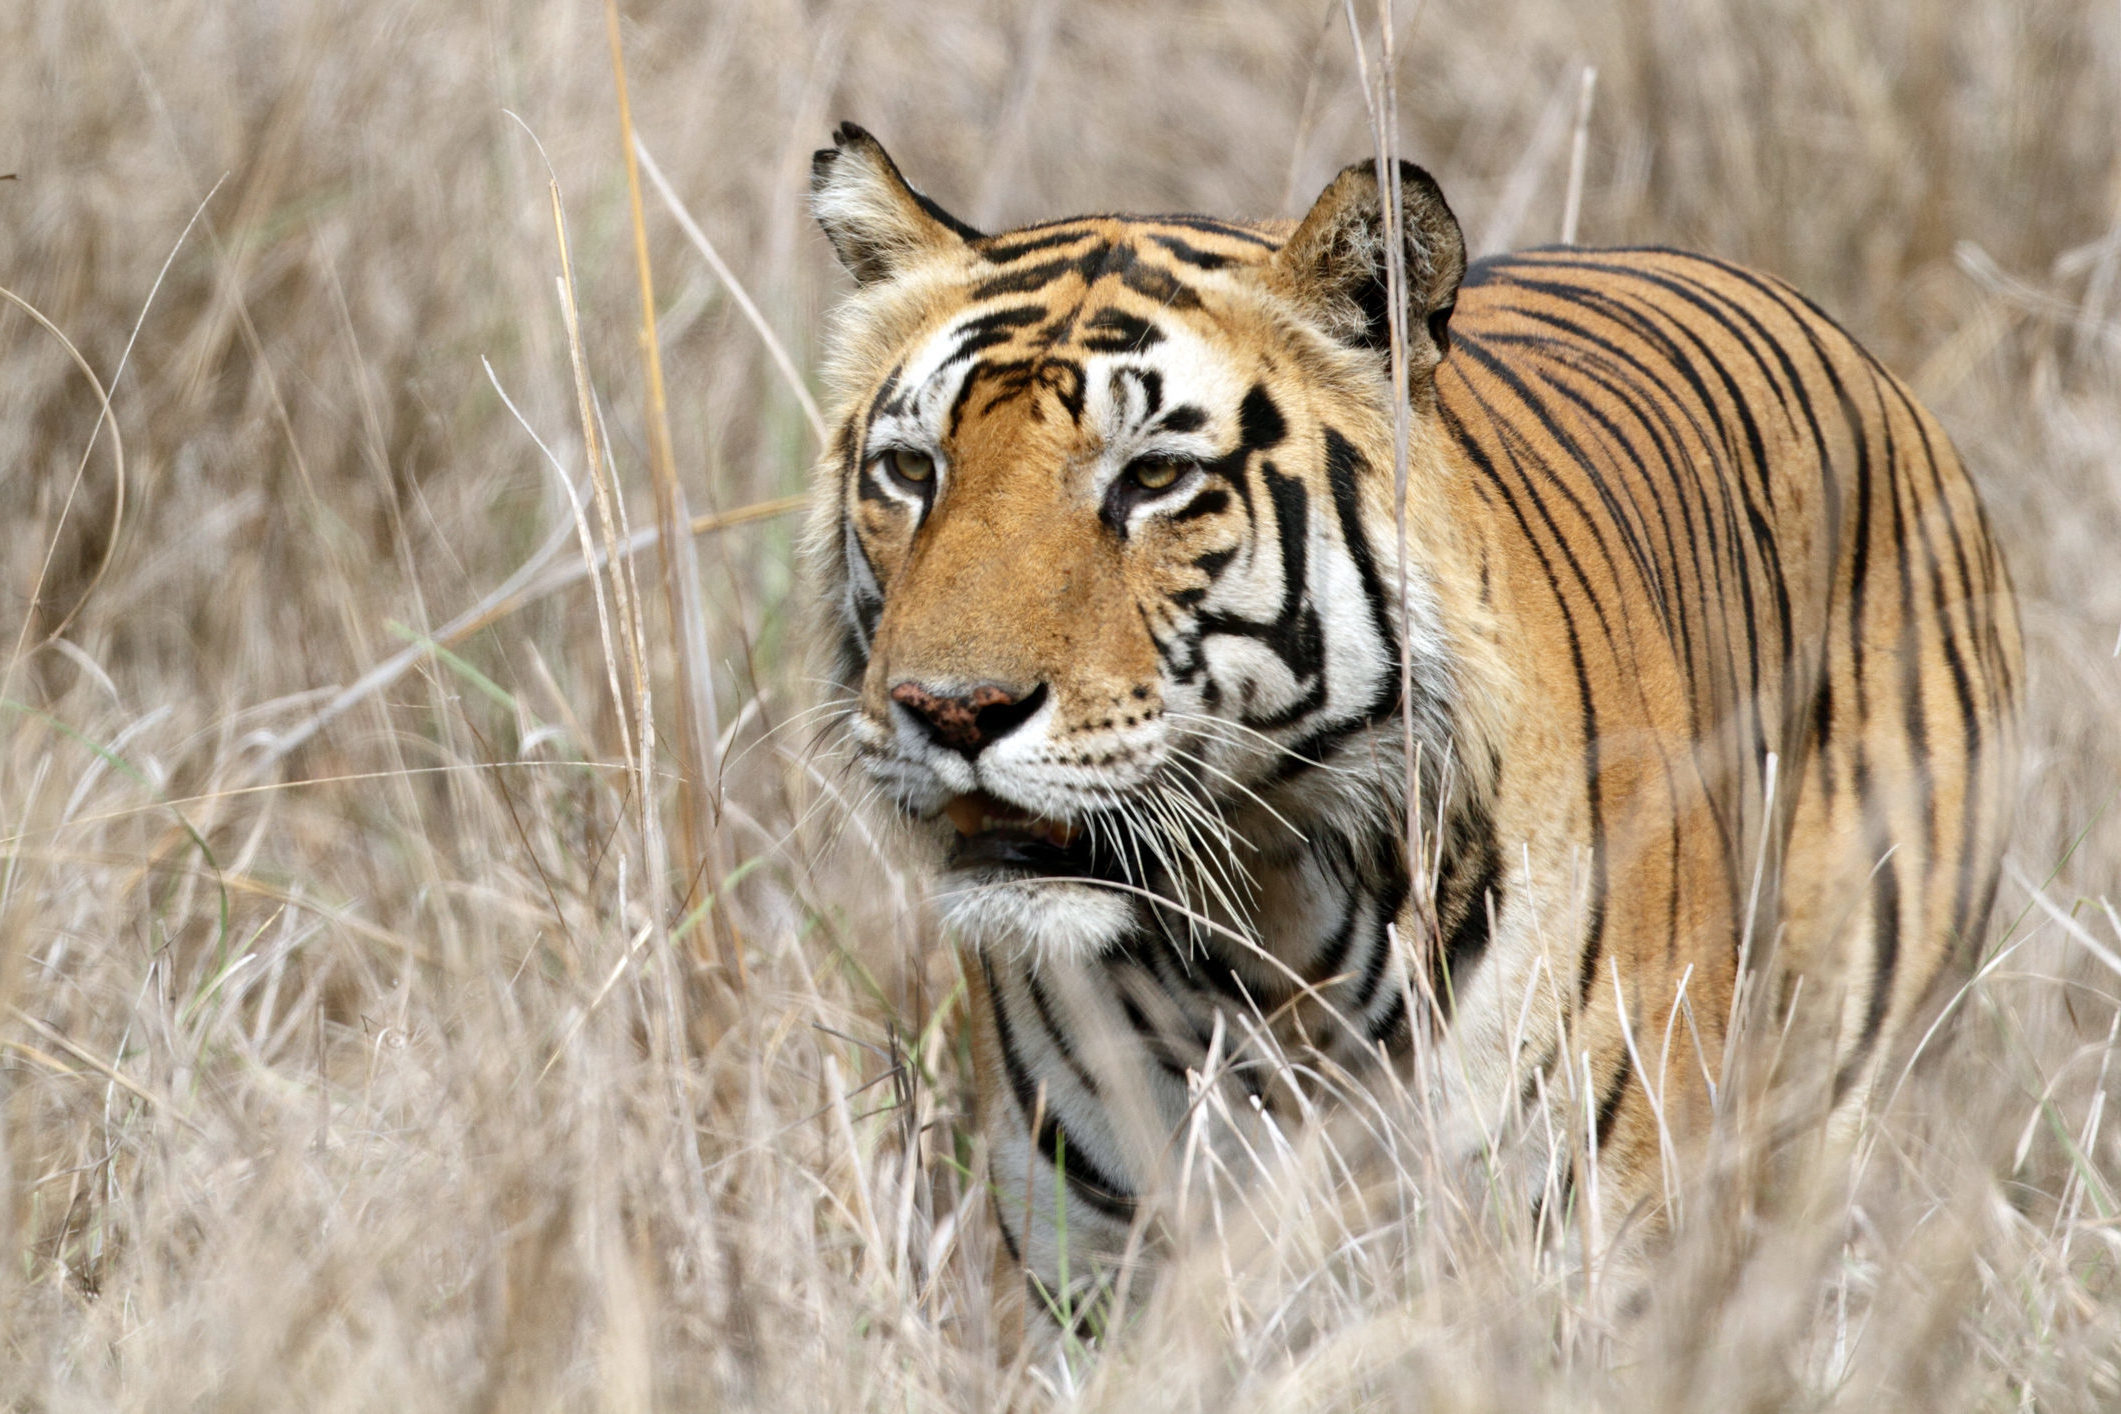 Large male Bengal Tiger in the wild, India